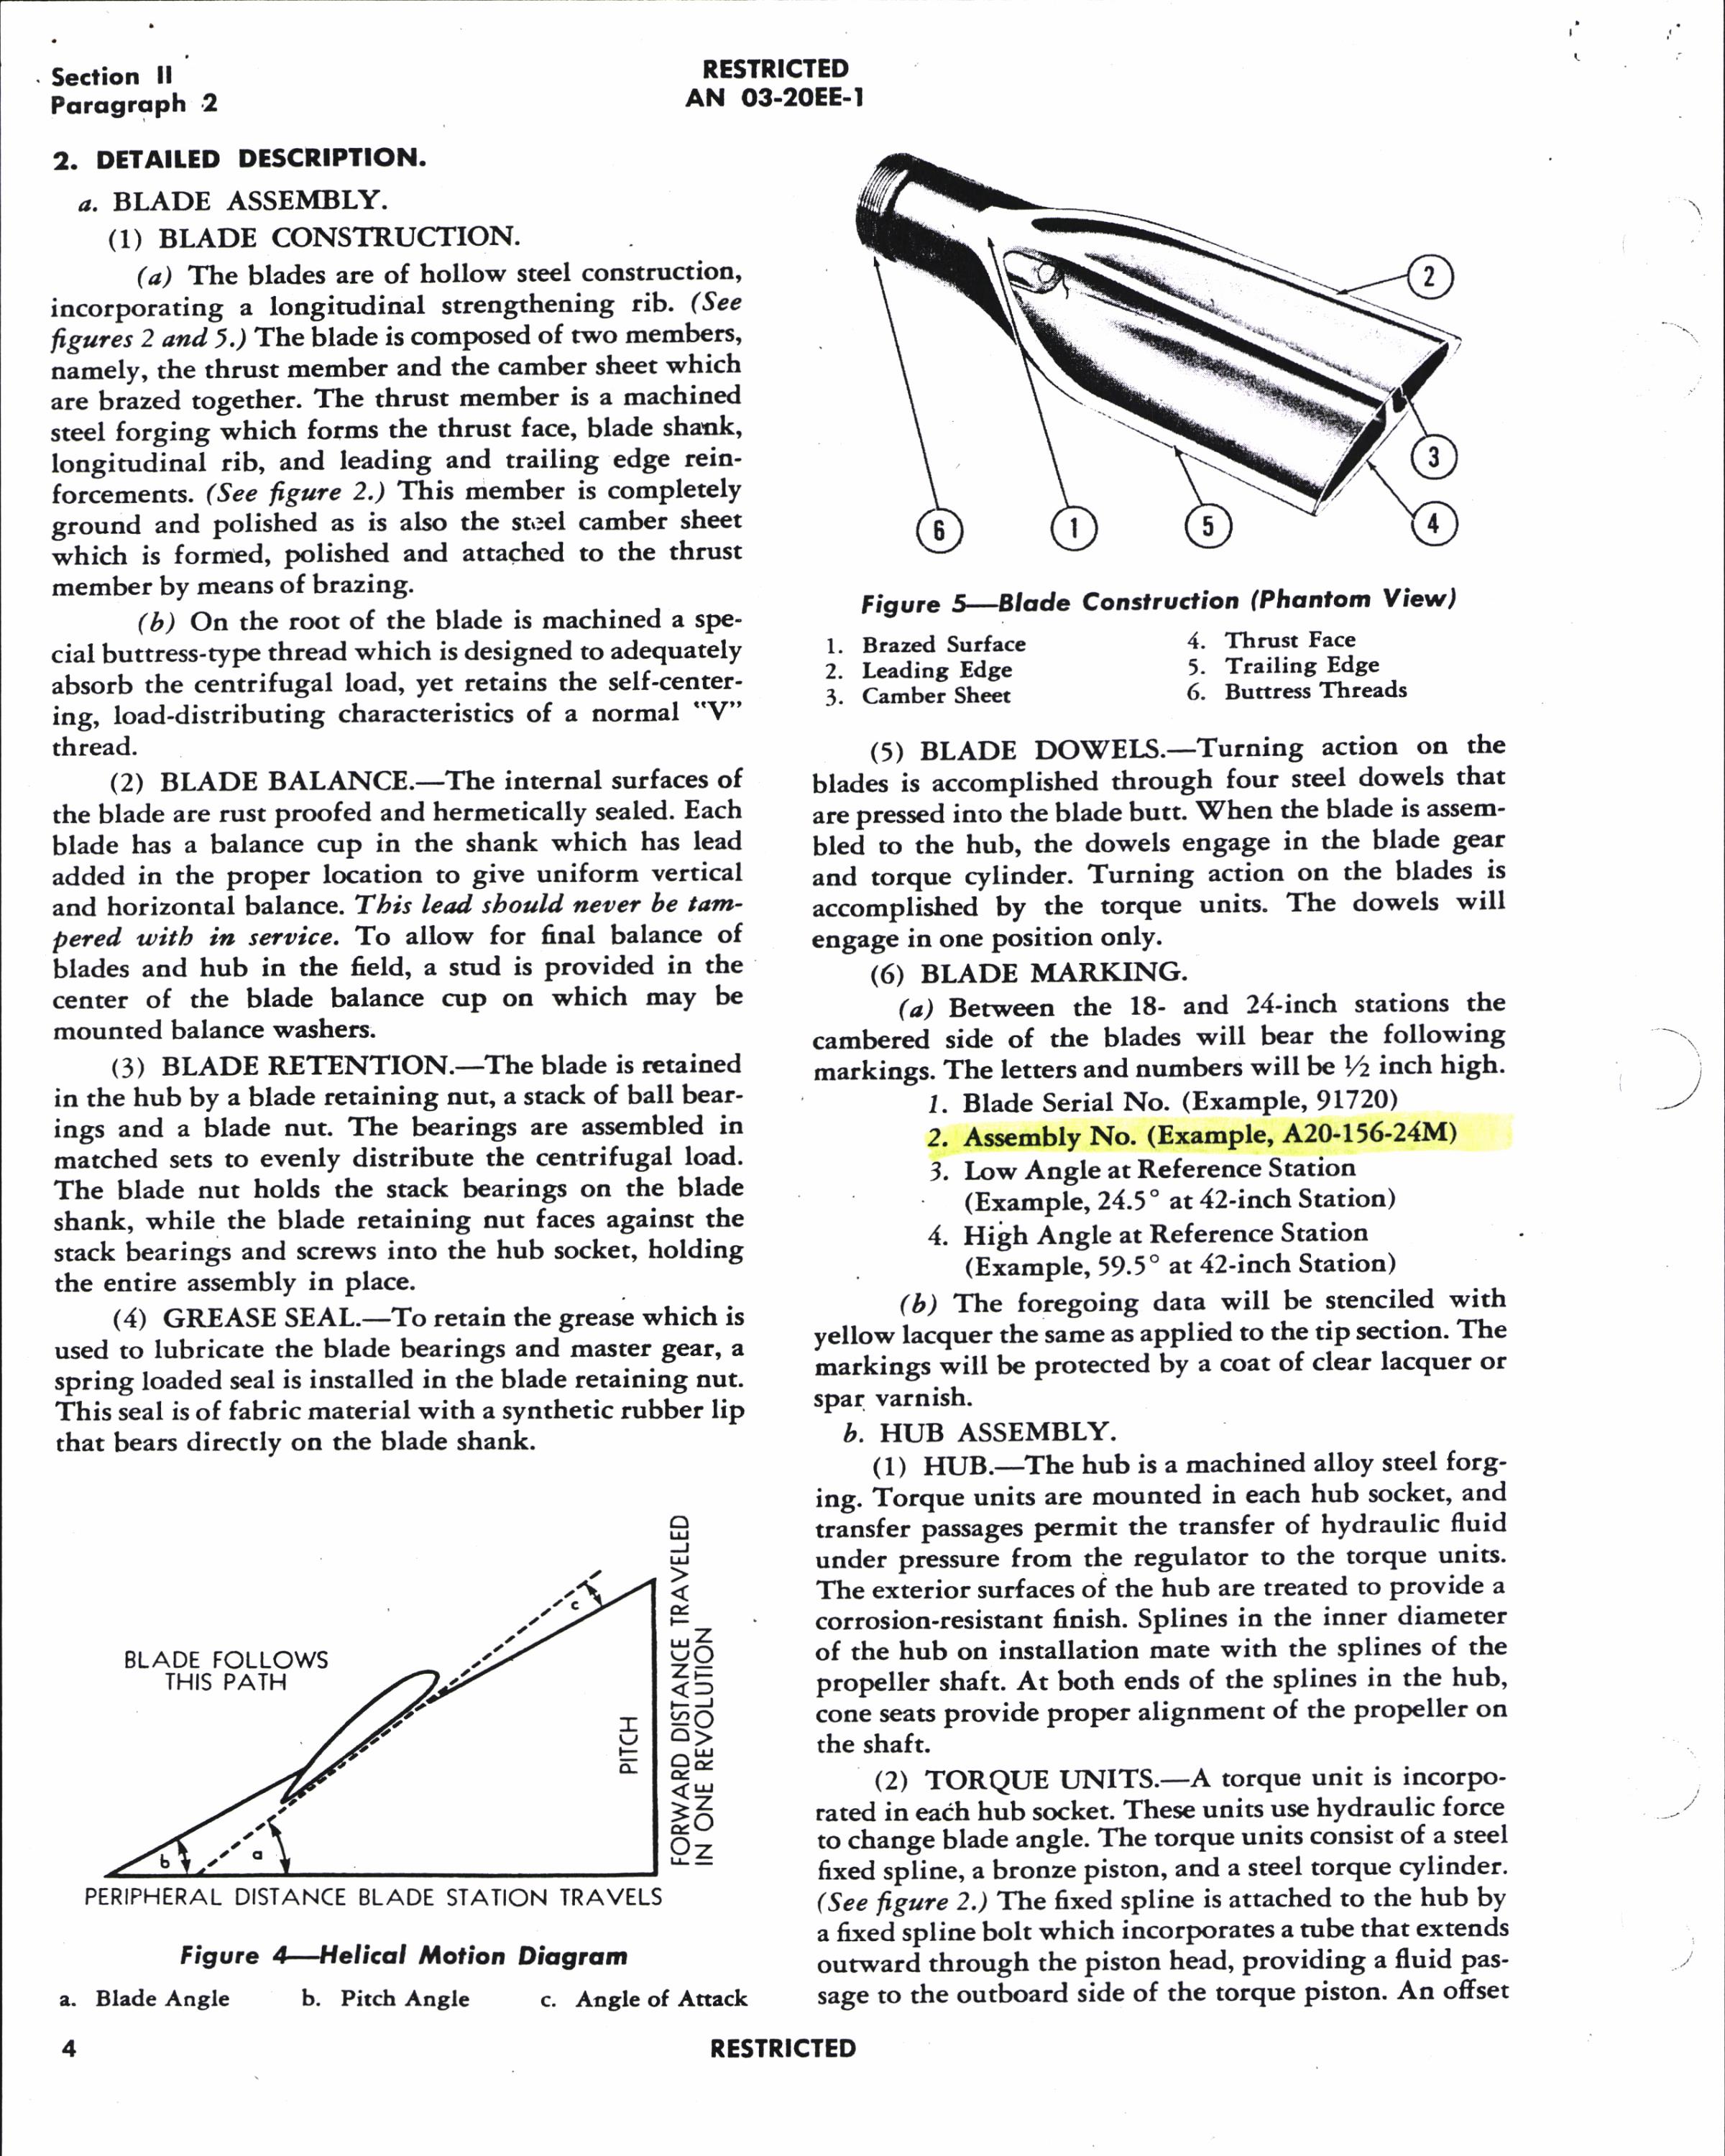 Sample page 7 from AirCorps Library document: Handbook of Instructions with Parts Catalog for Hydraulically Operated Propeller Models A642S-E1 and -E2